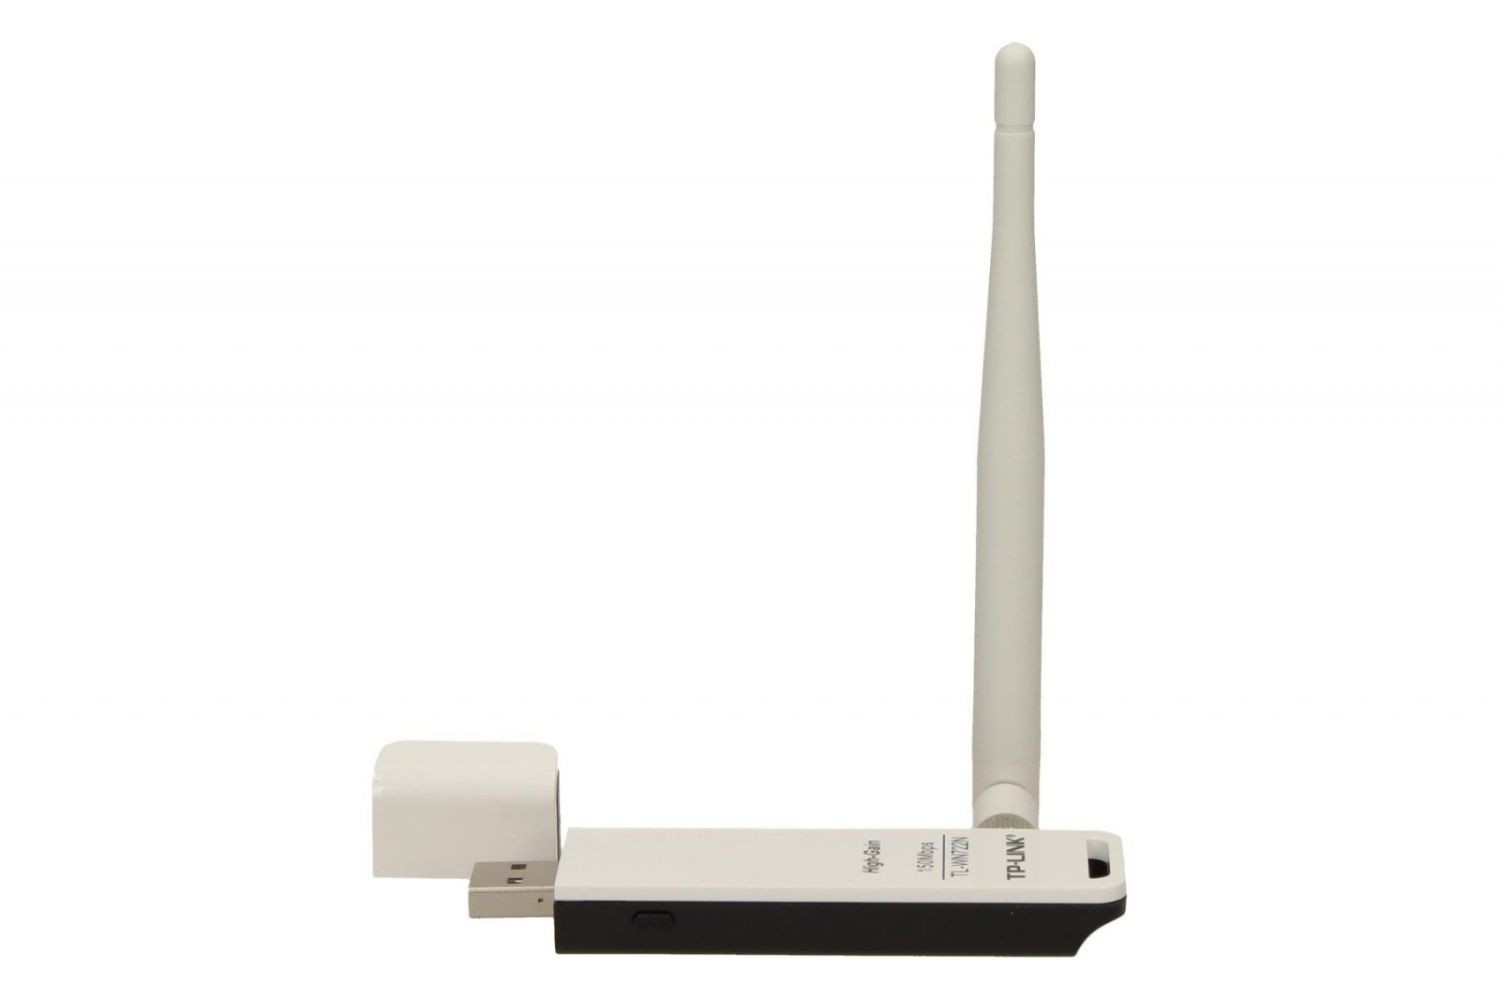 TP-Link TL-WN722N adapter USB Wireless 802.11n/150Mbps